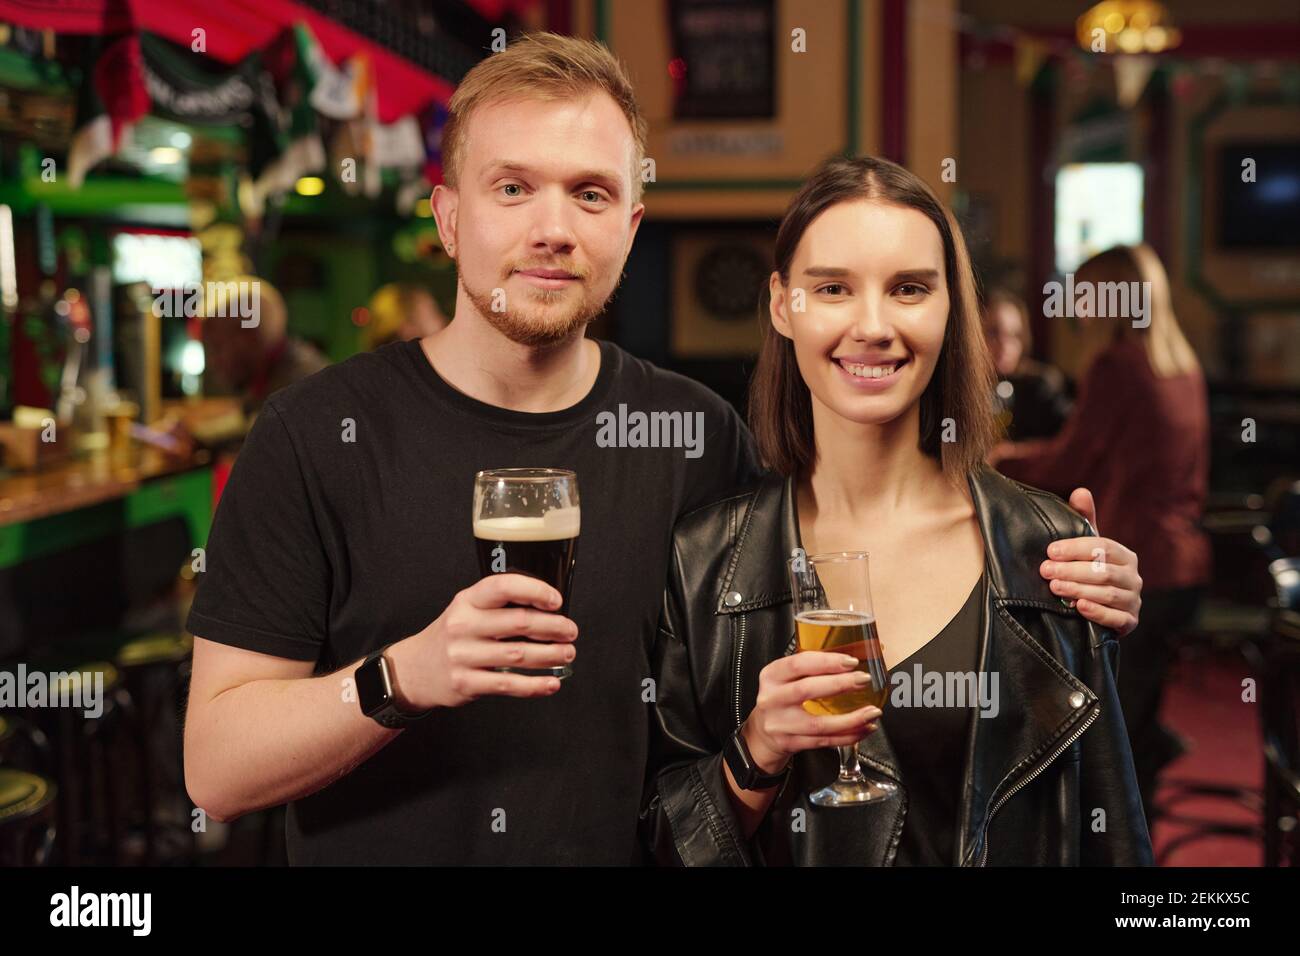 Portrait of young couple holding glasses of beer and smiling at camera while standing in the bar Stock Photo